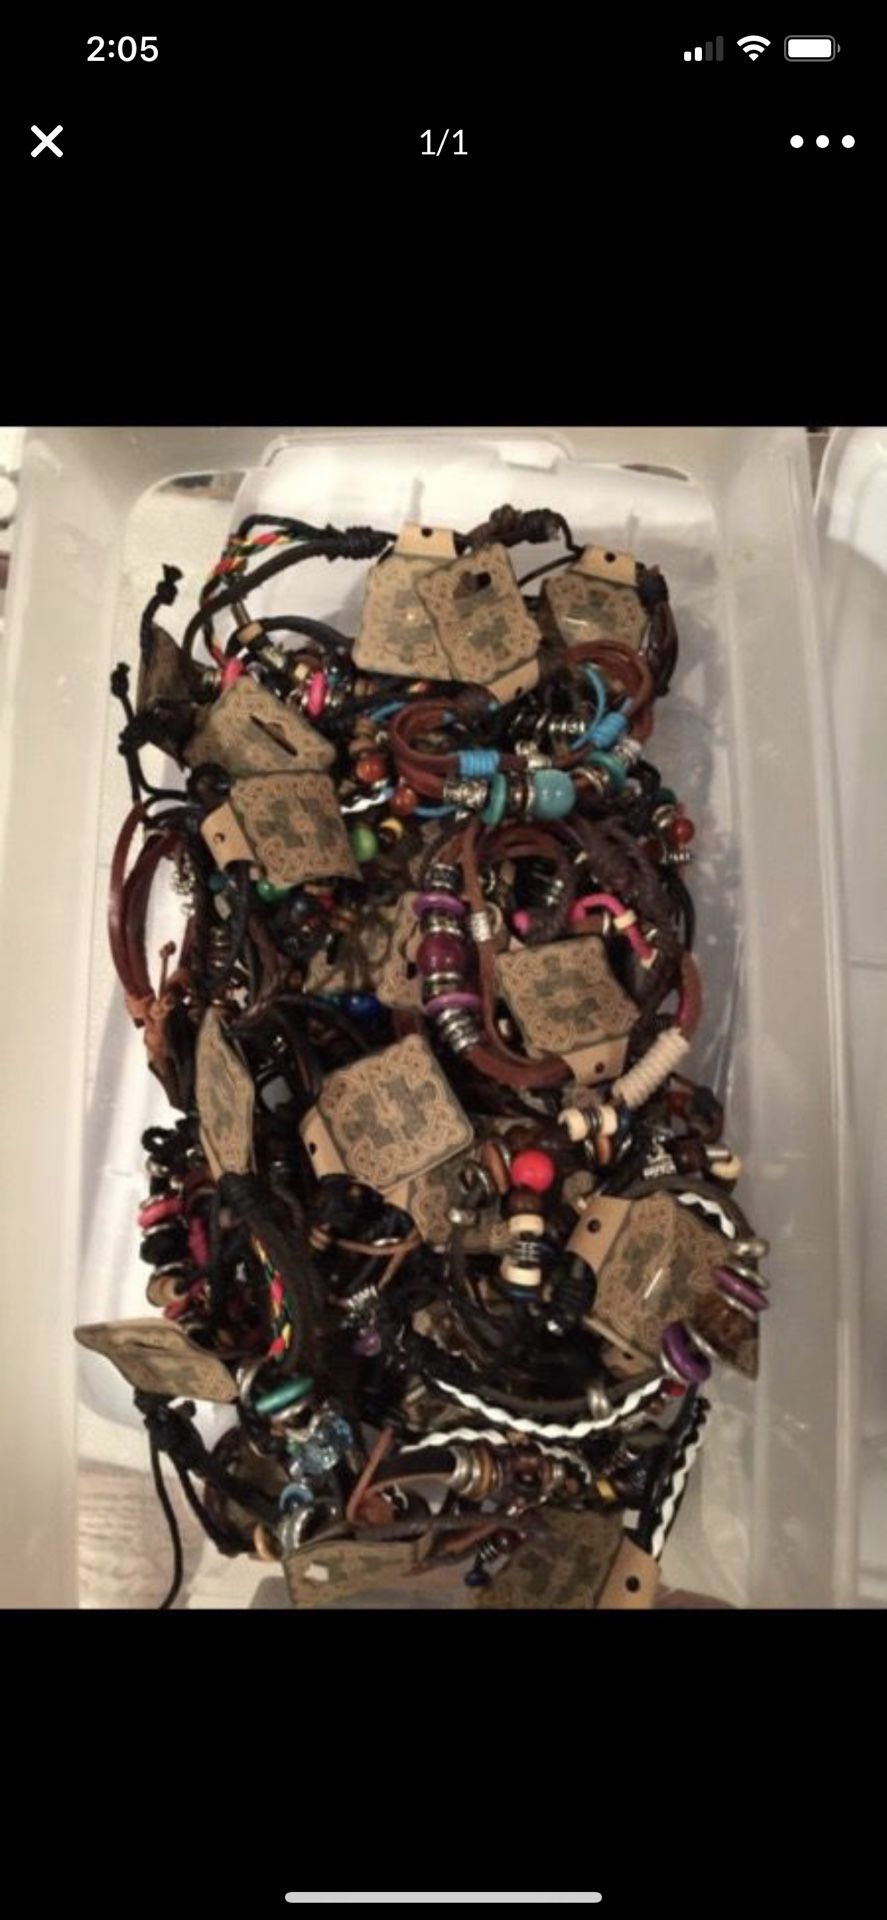 Leather Bracelets Brand New, $1 each lots of different styles